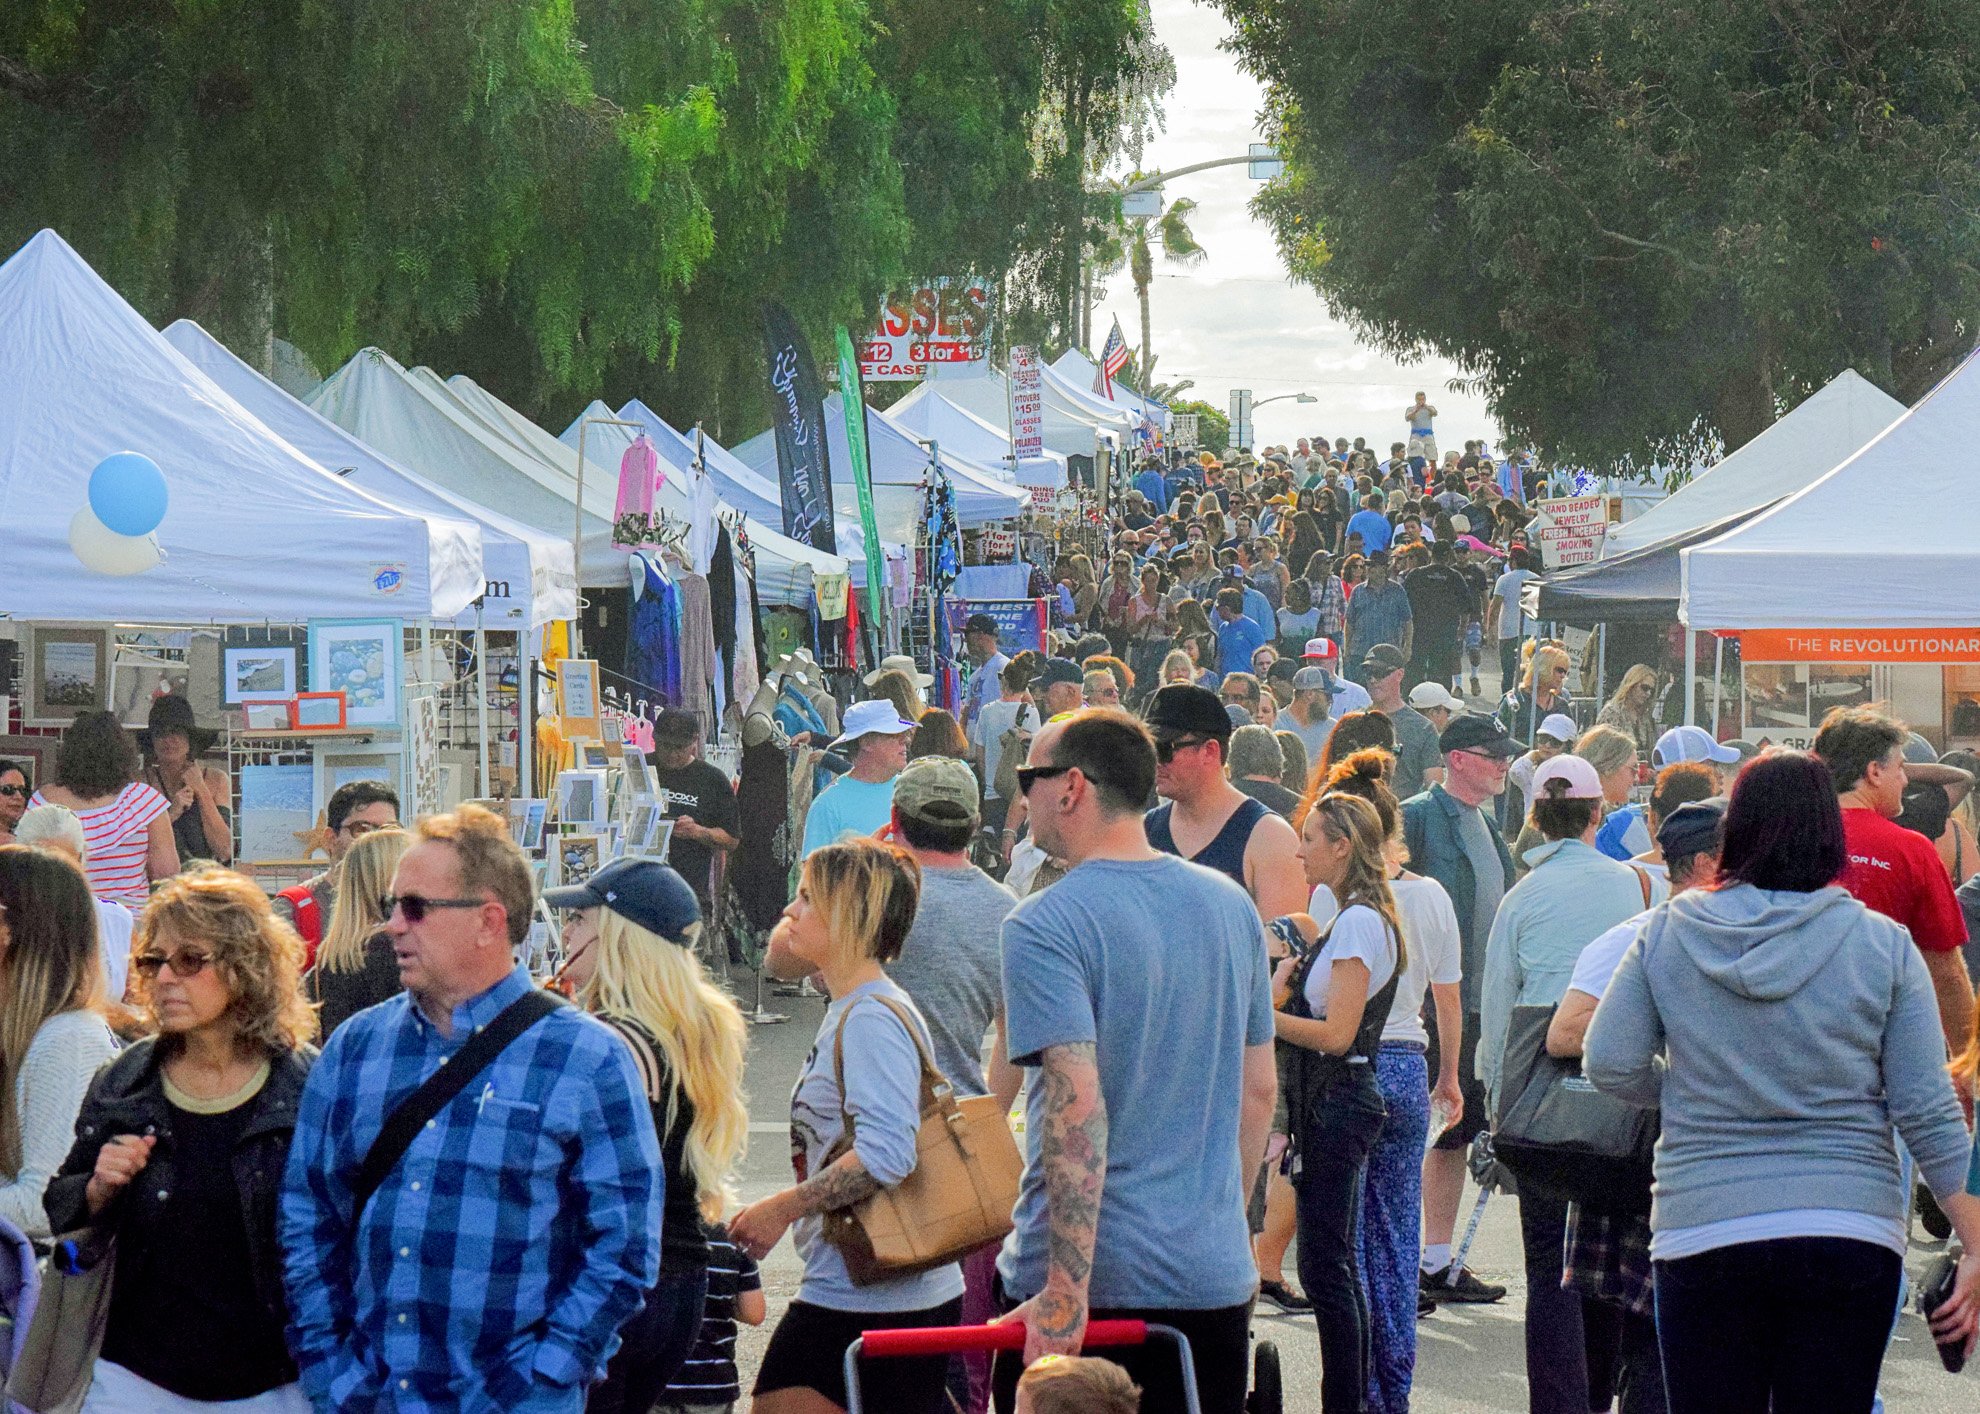 Our Carlsbad Village Street Faire celebrates 45 years! Carlsbad